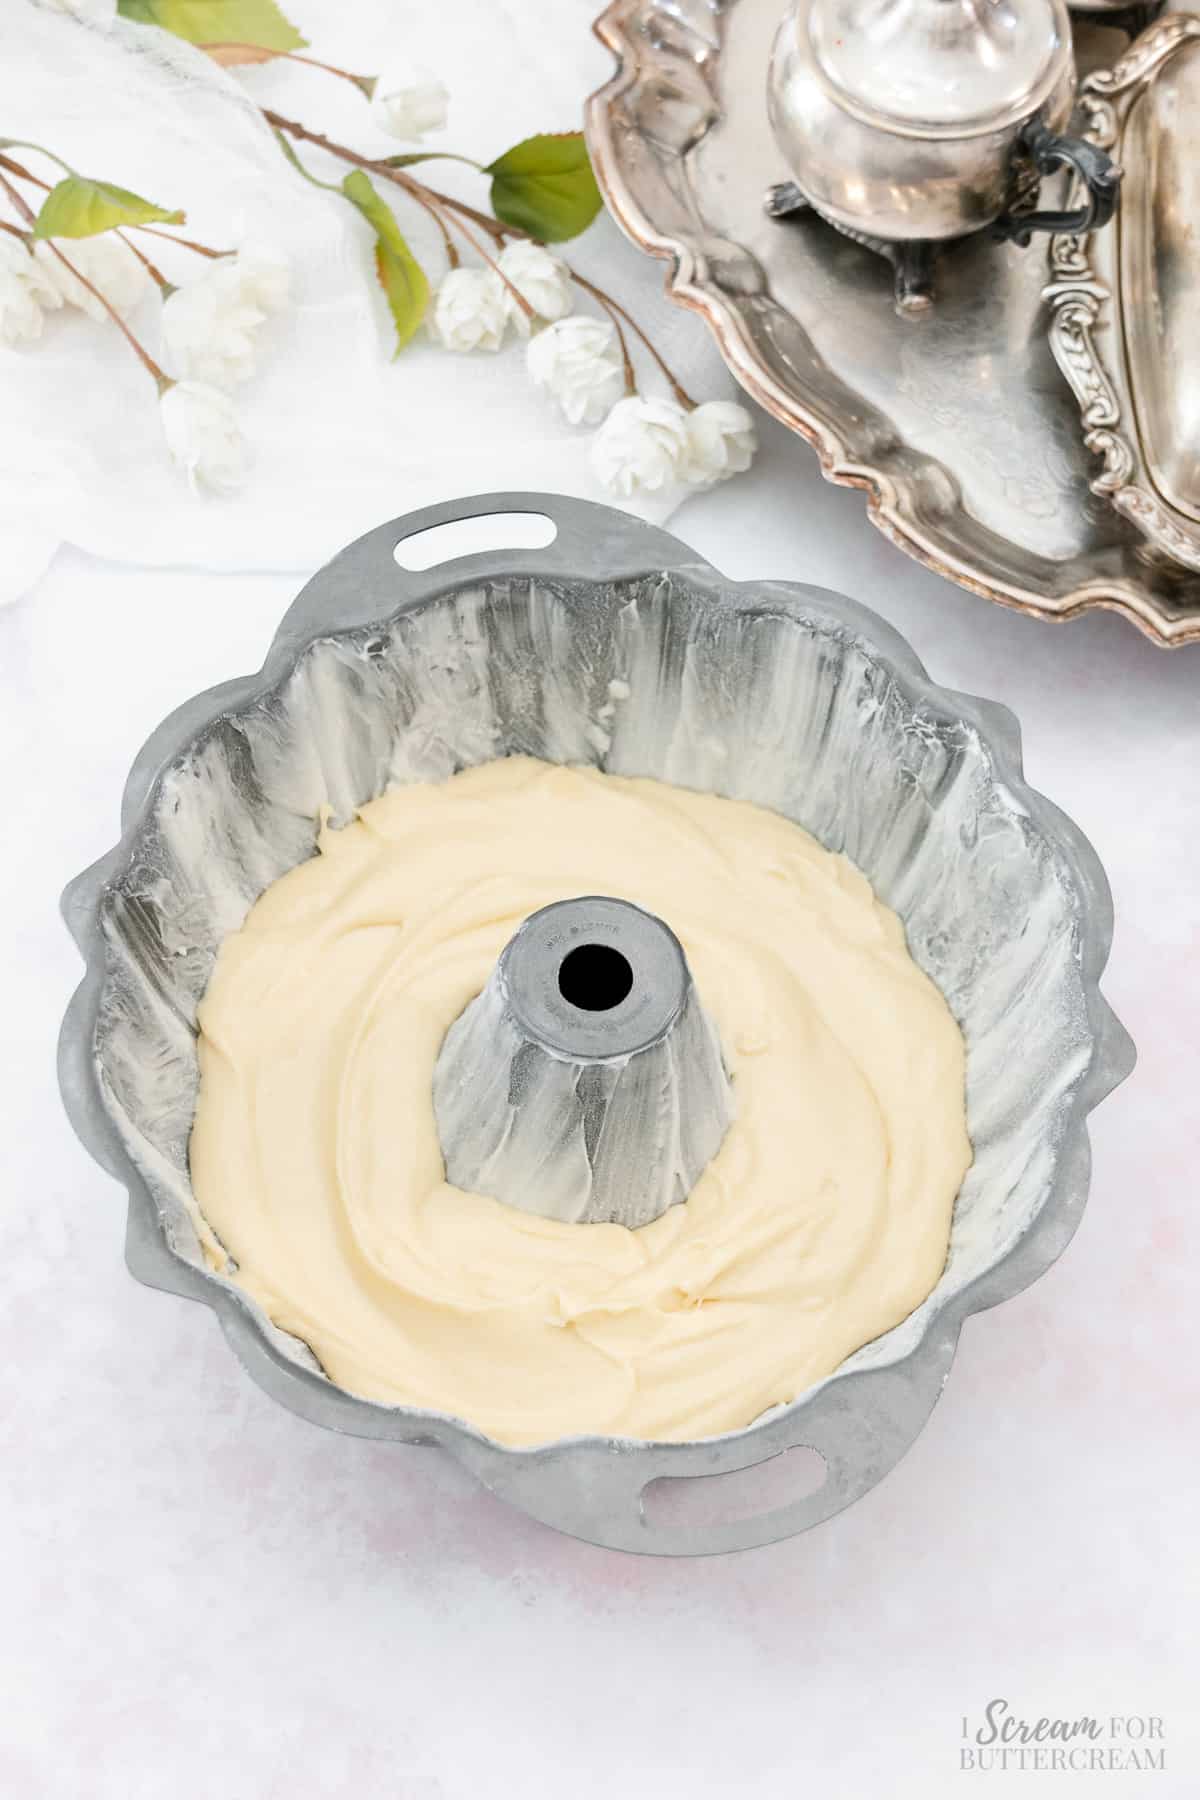 Bundt pan with only a third of the batter added.